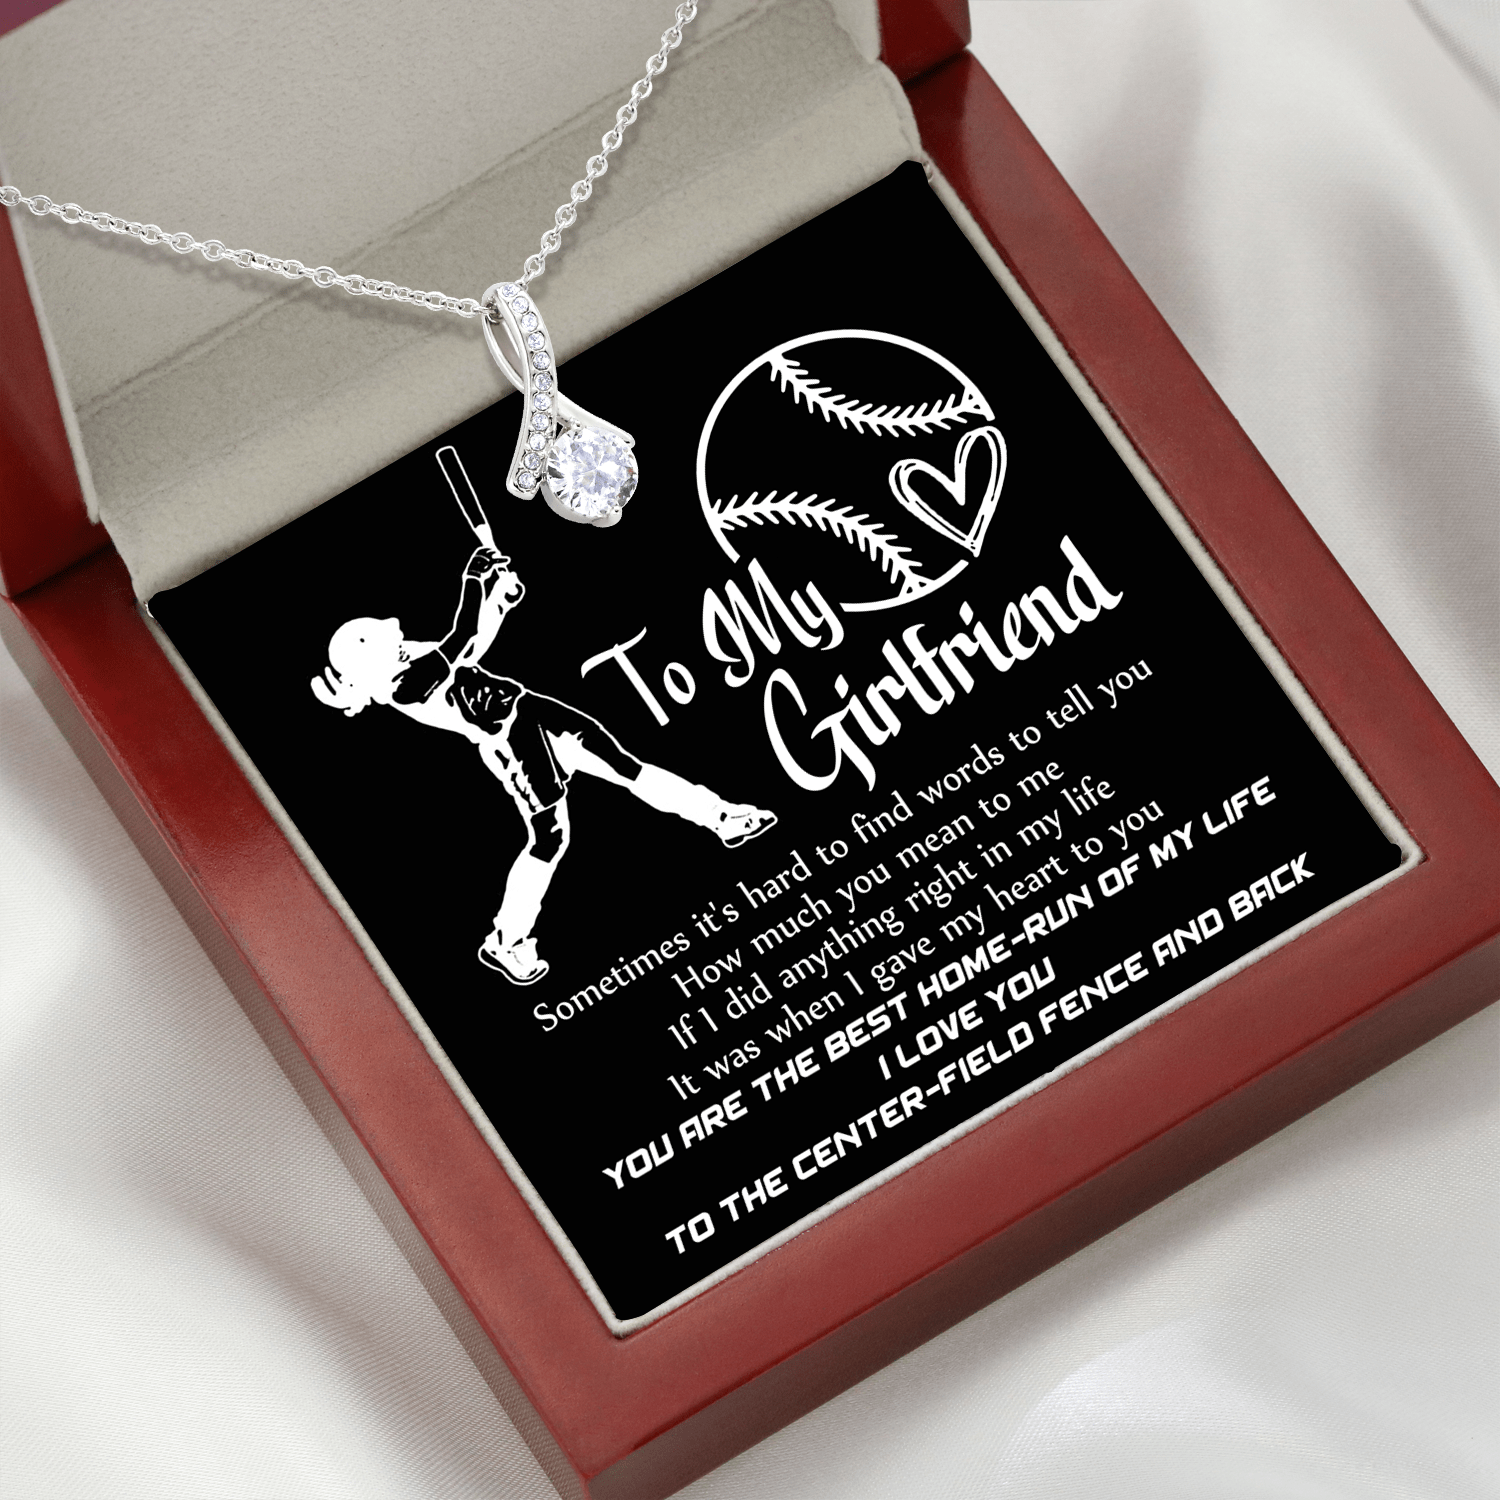 Alluring Beauty Necklace - Softball - To My Girlfriend - Never Forget That I Love You - Snb13037